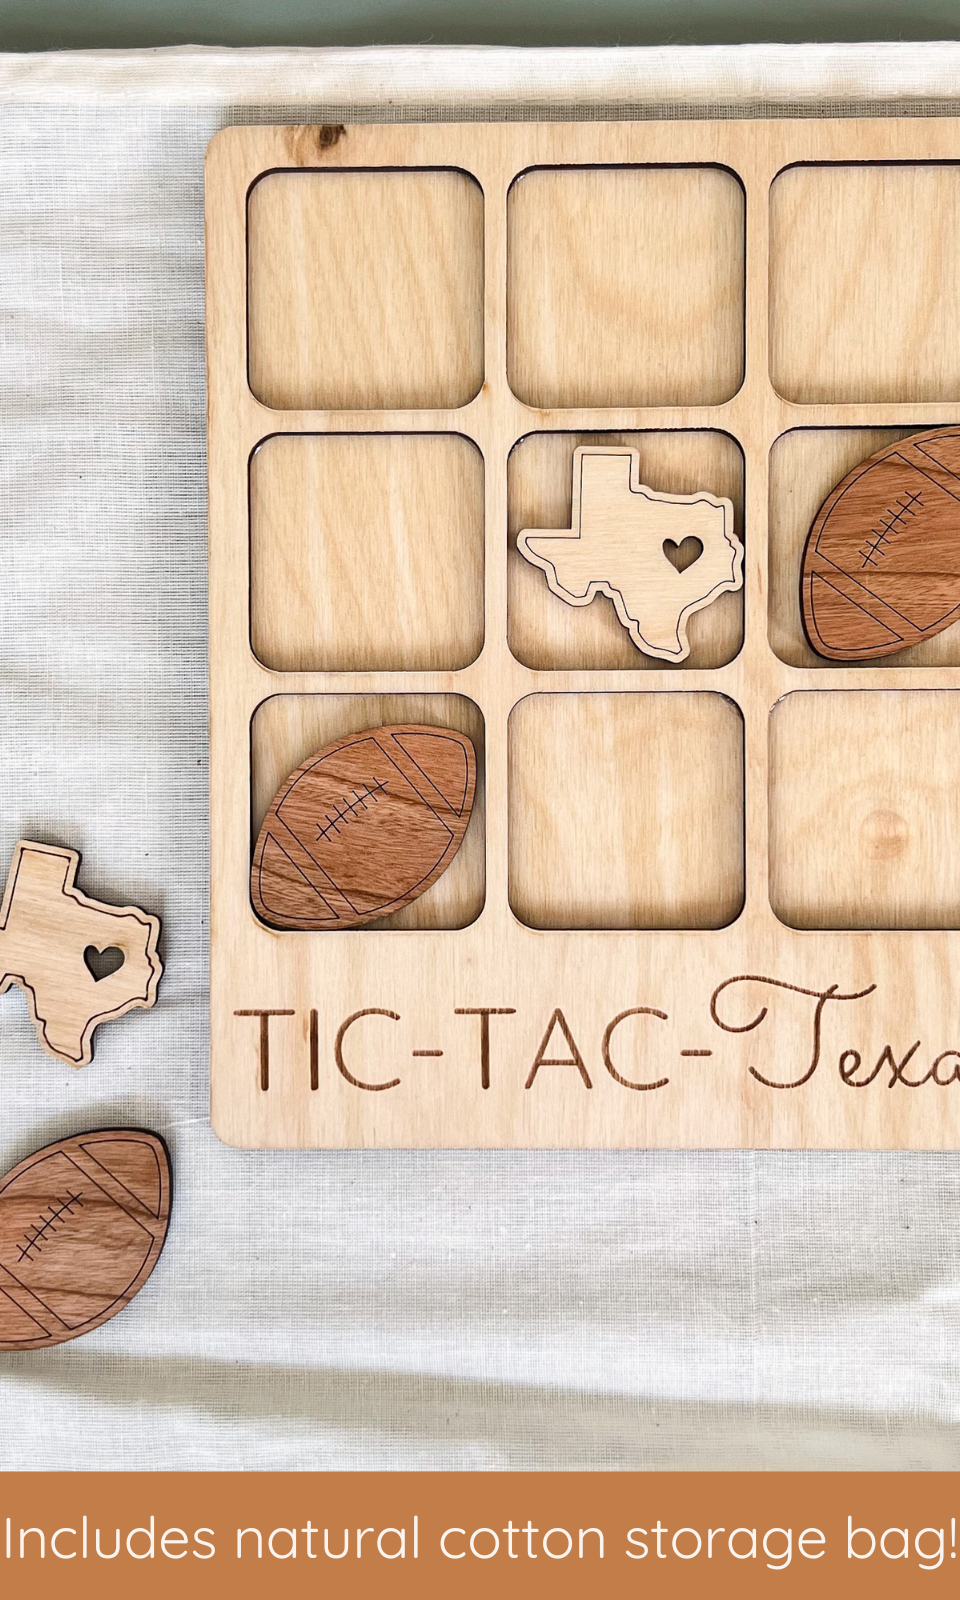 Christmas Holiday Board Game - Tic-Tac-Toe Game: FINISHED - Smooth Clear Coat     Birch House Living- Tilden Co.